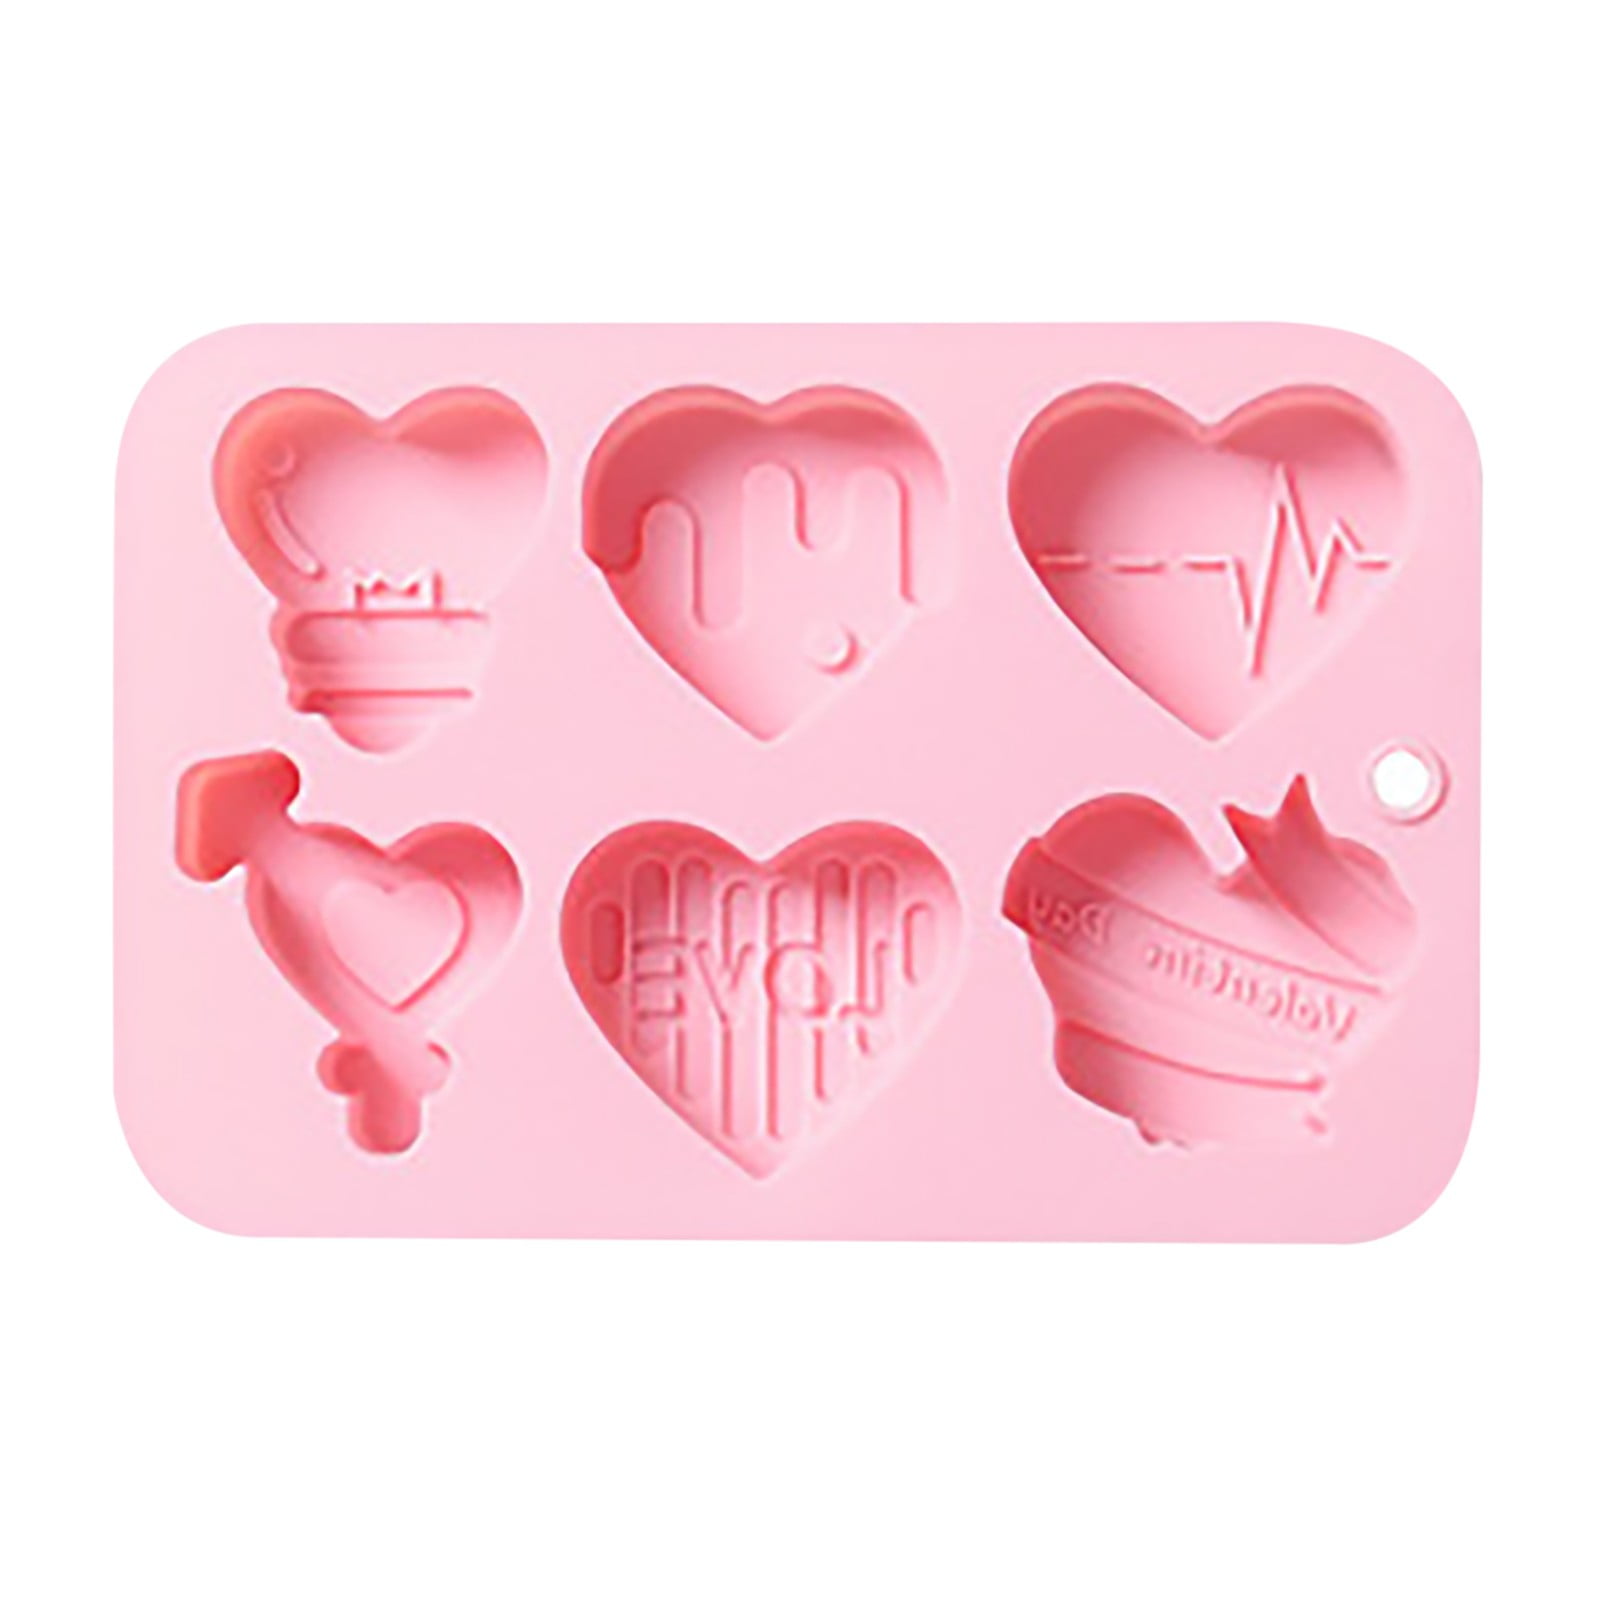 Gamer Hearts Hard silicone Chocolate and Resin use 6 Heart Silicone Mold 